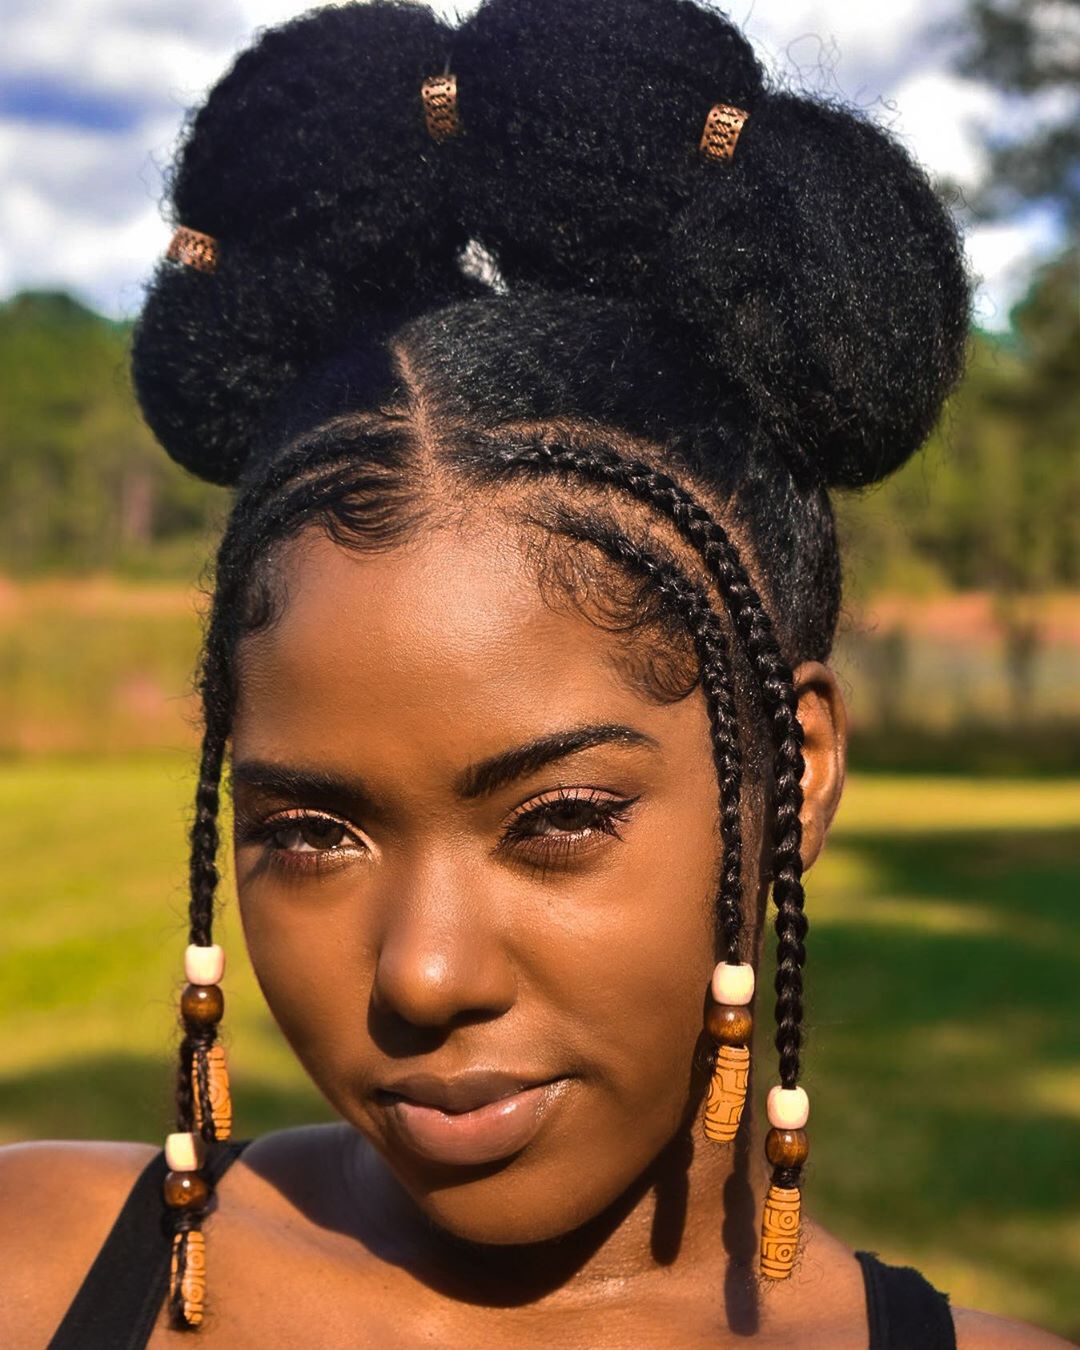 Creative And Beautiful Black Hairstyle Ideas From Instagram  African hair  braiding styles Hair styles African braids hairstyles